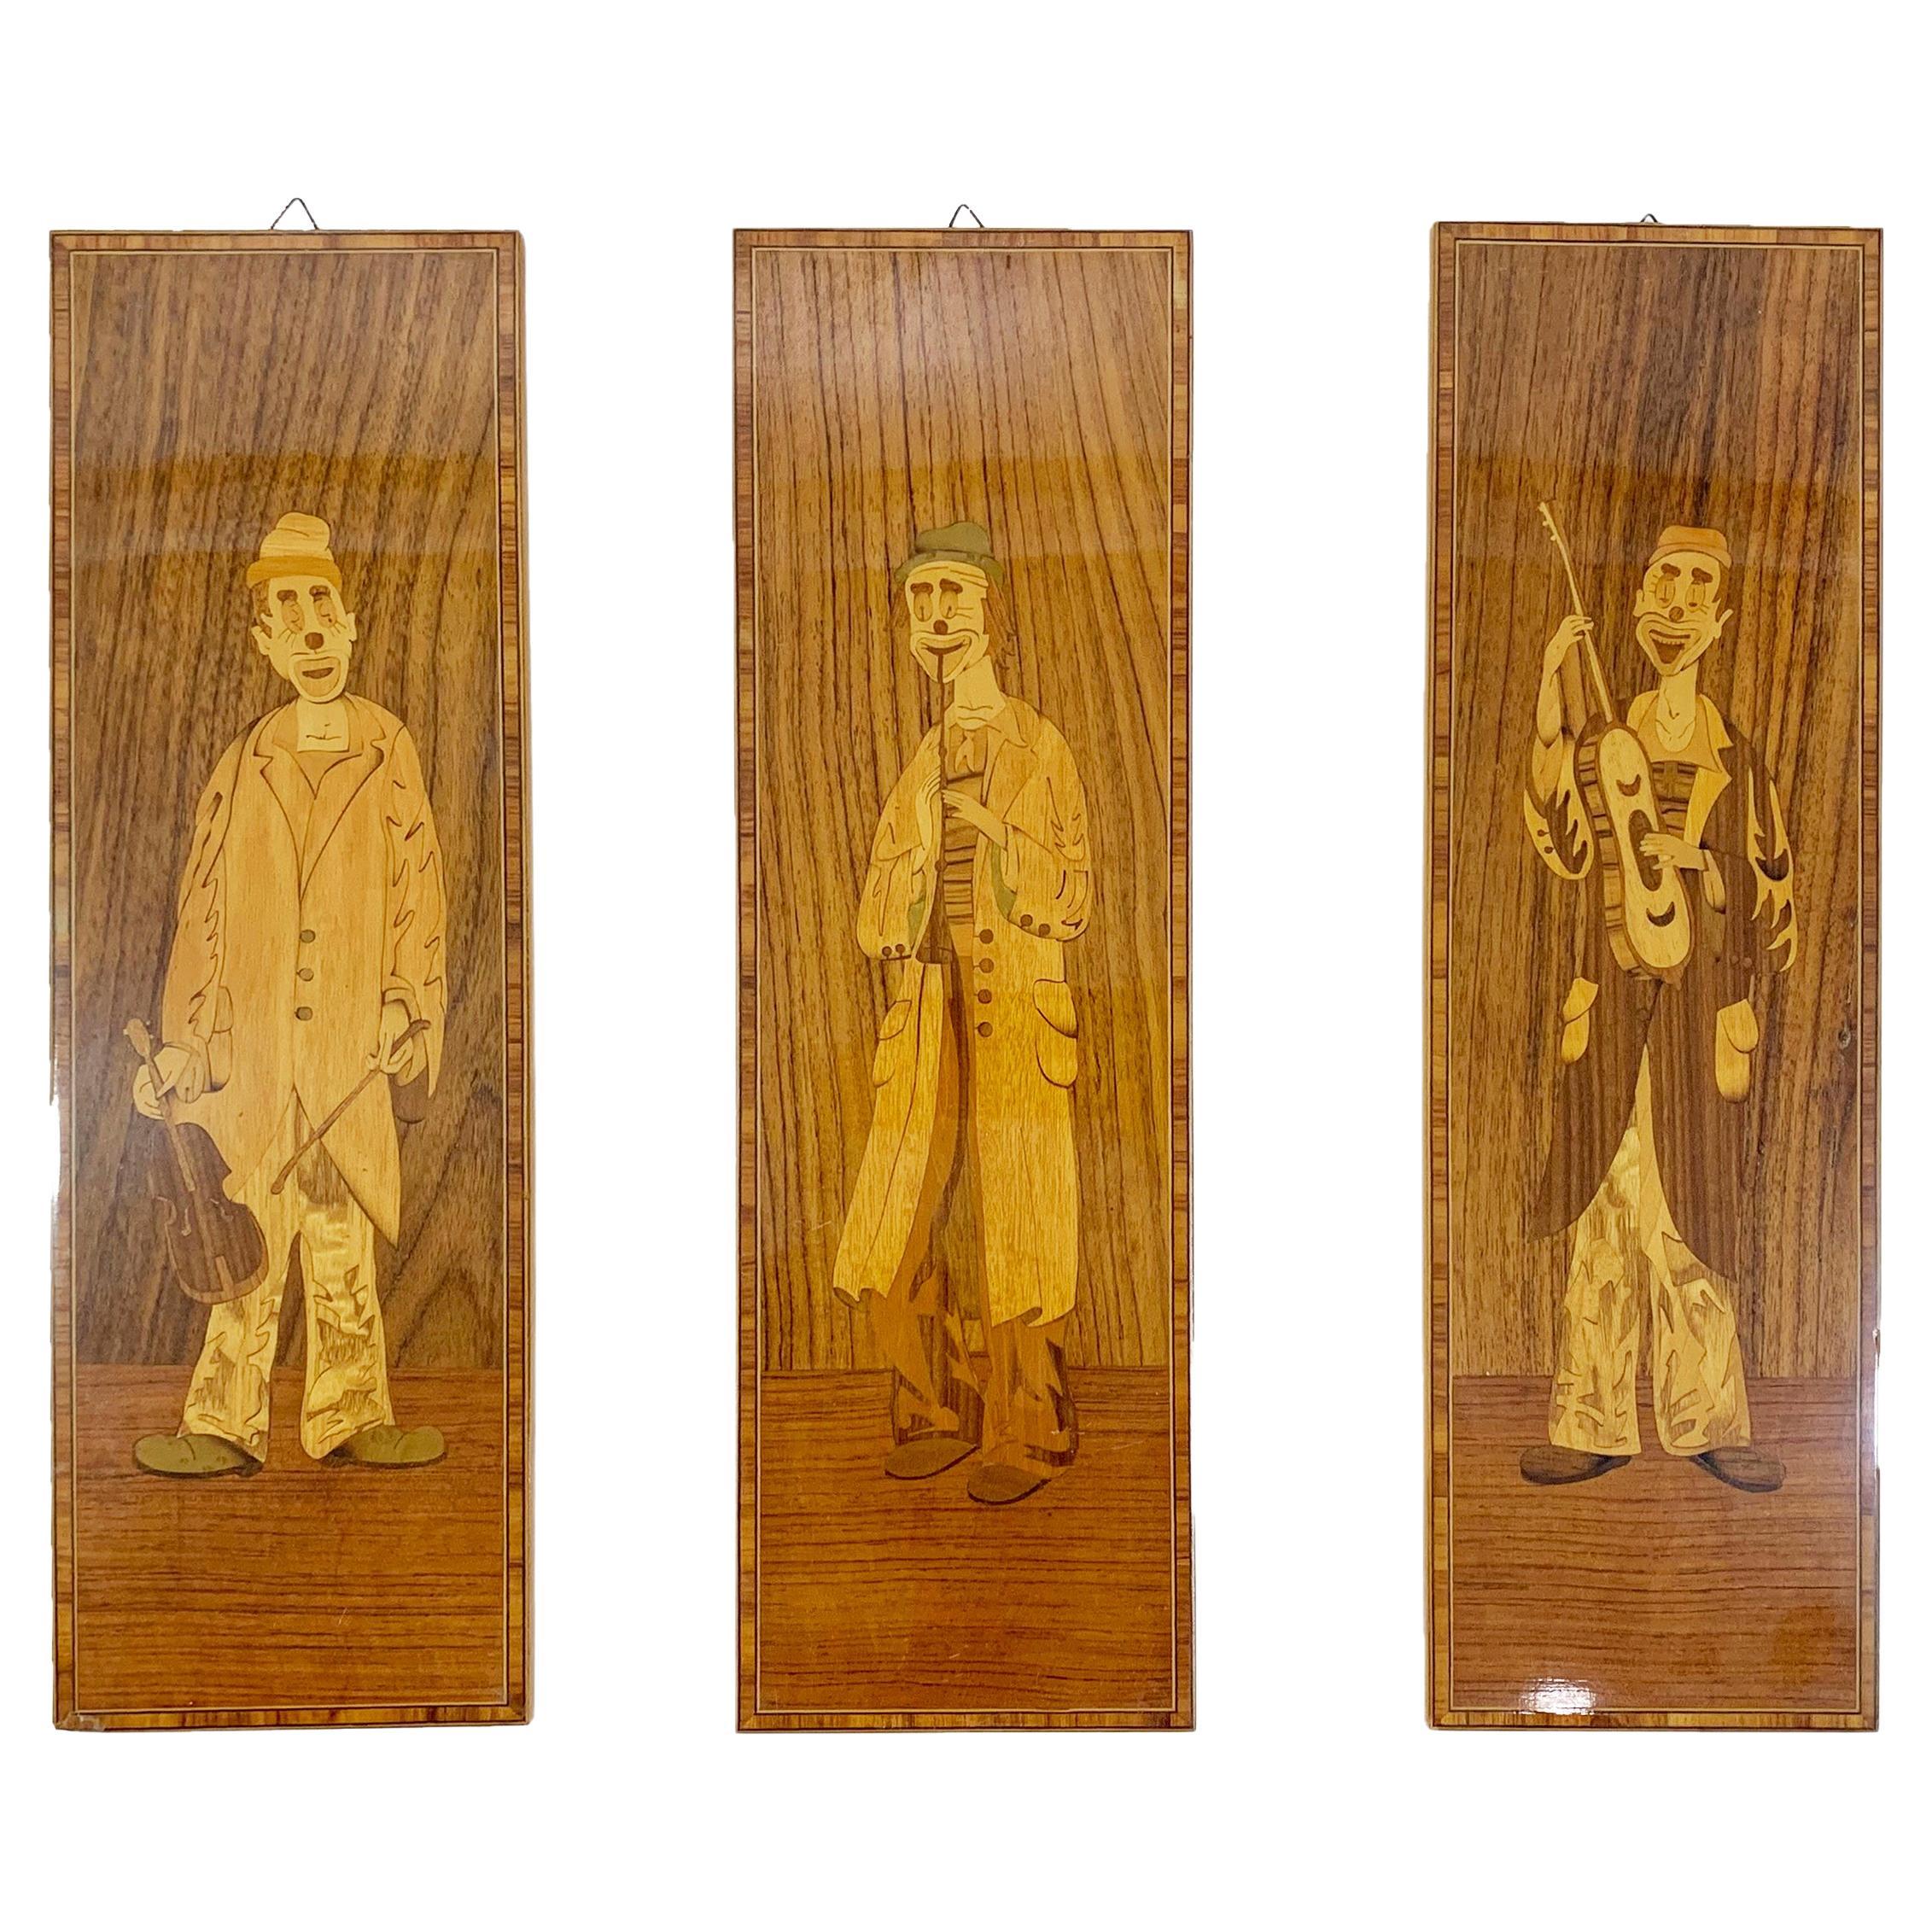 Set 2 of 3 Vintage Italian Marquetry Wood Inlay Musician Clowns Panels Stamped 